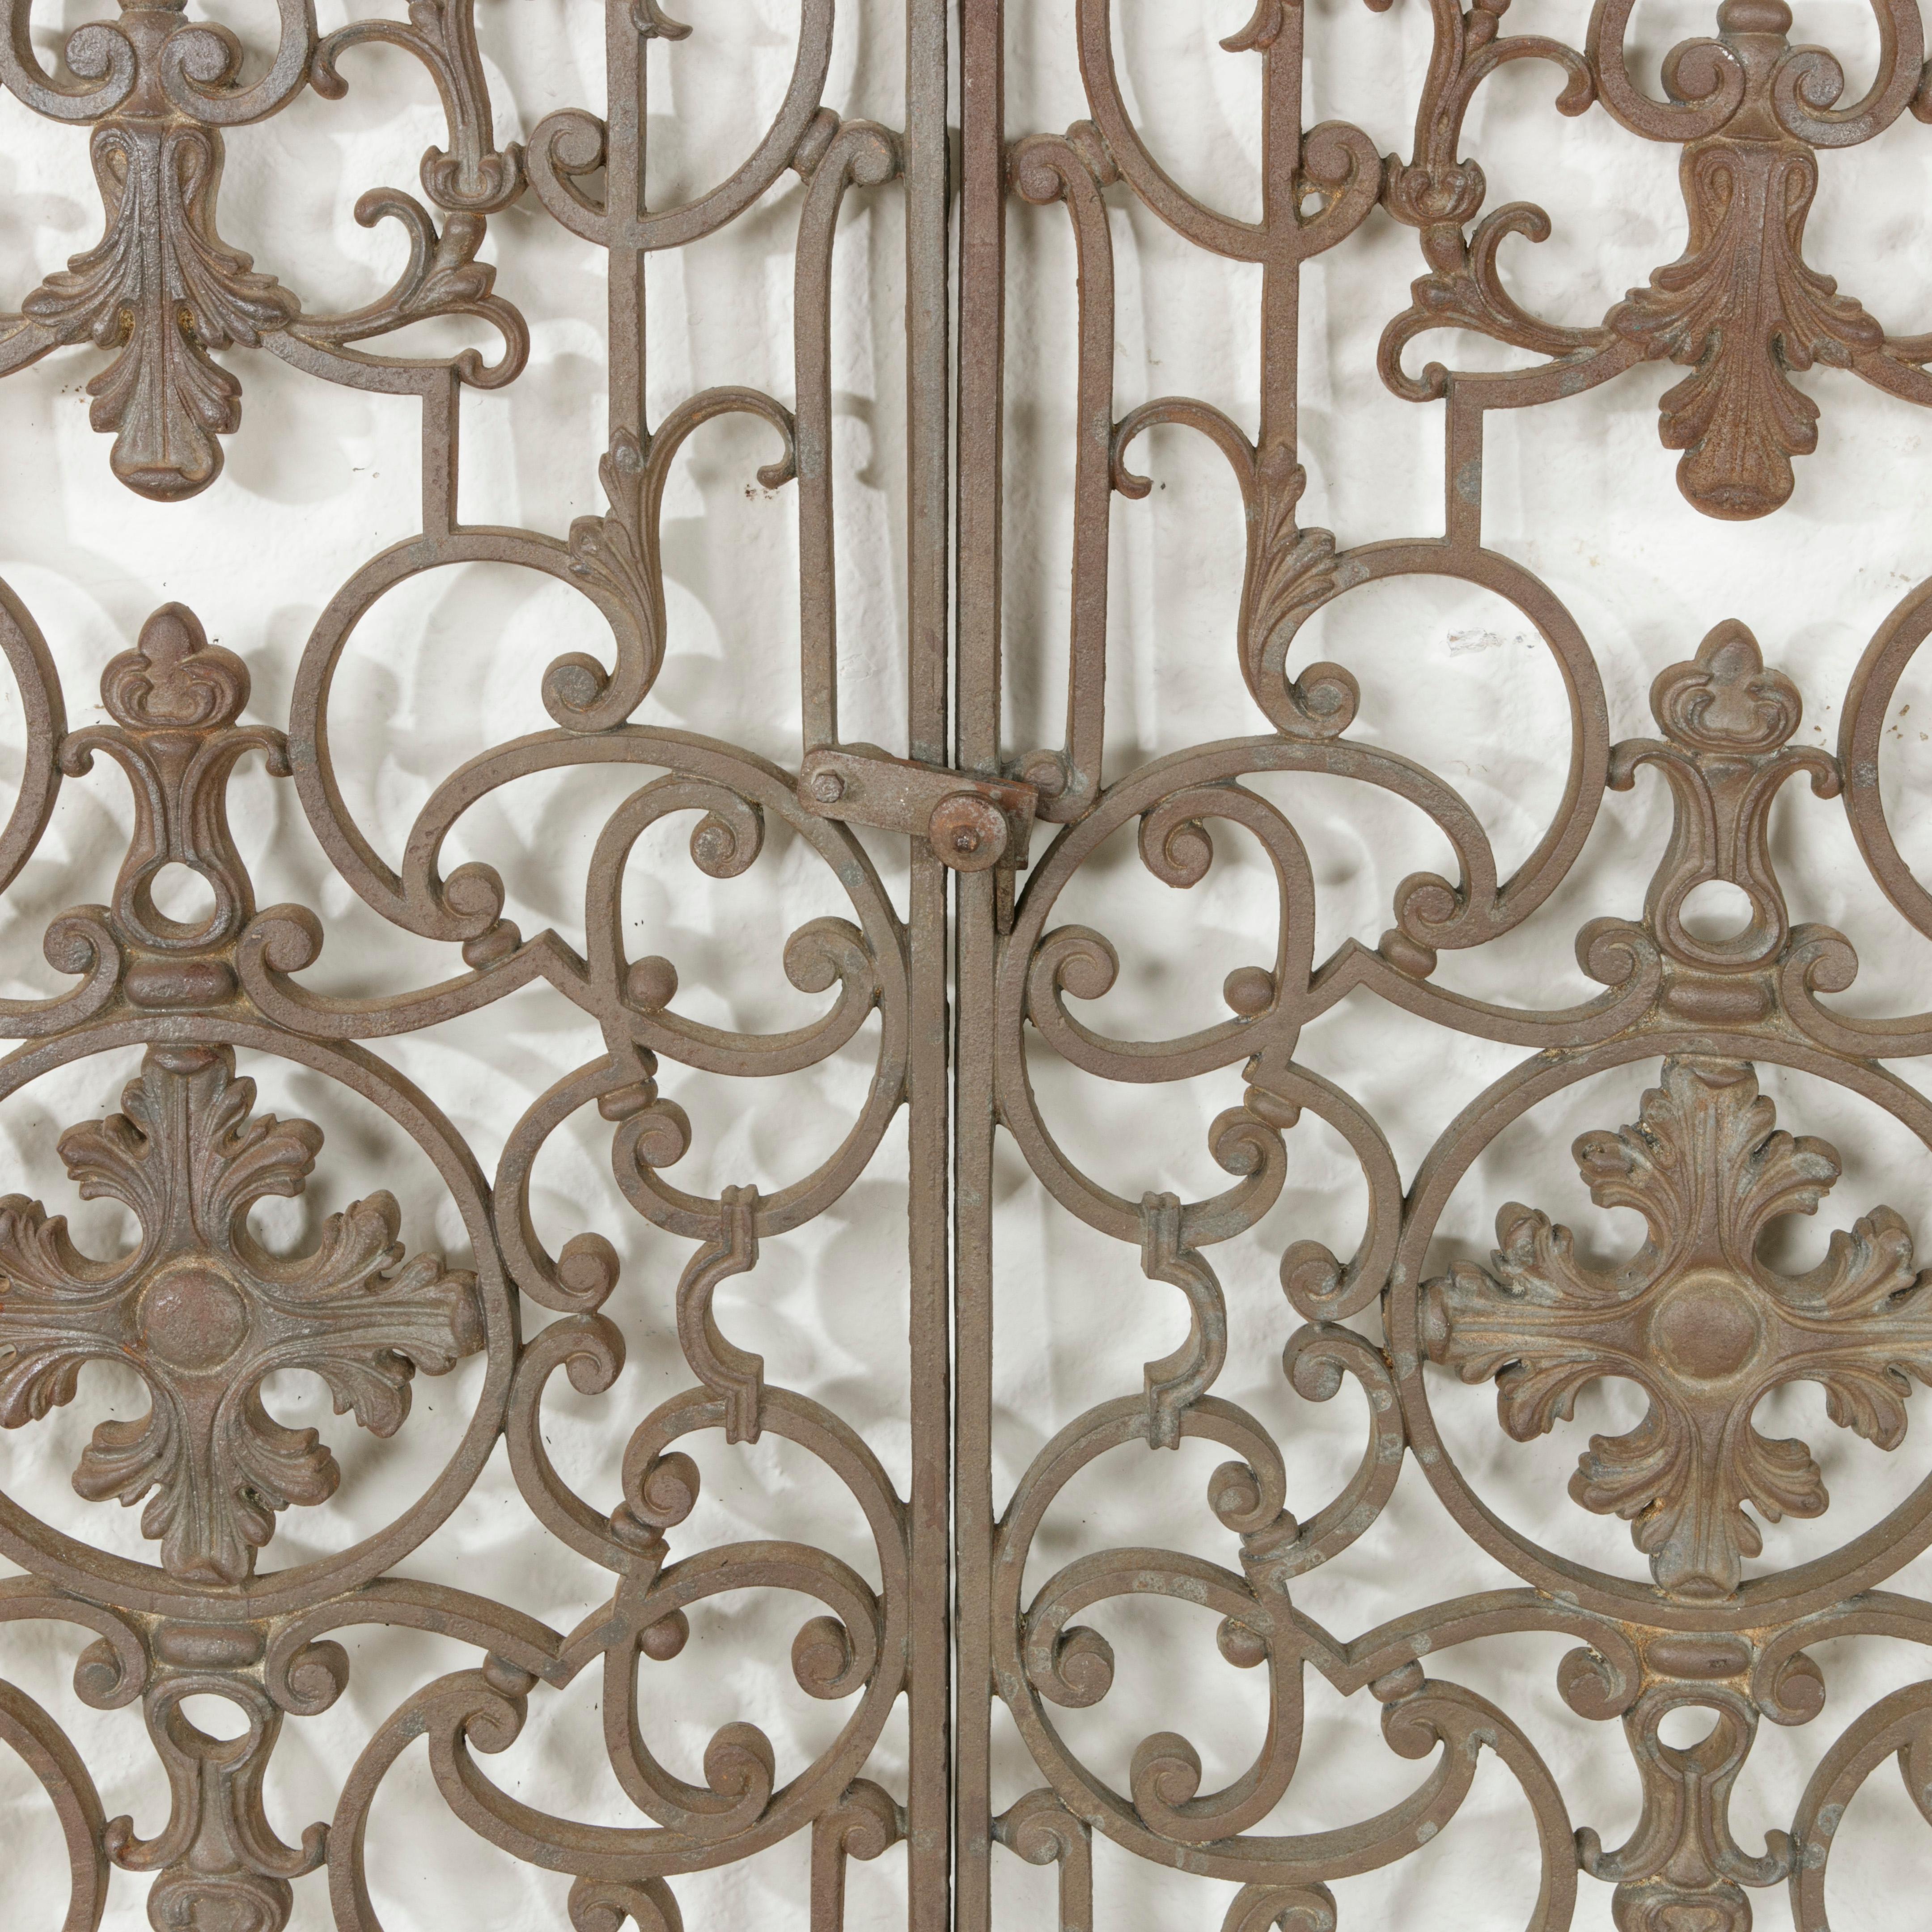 Pair of Early 20th Century French Iron Gates with Symmetrical Design 2